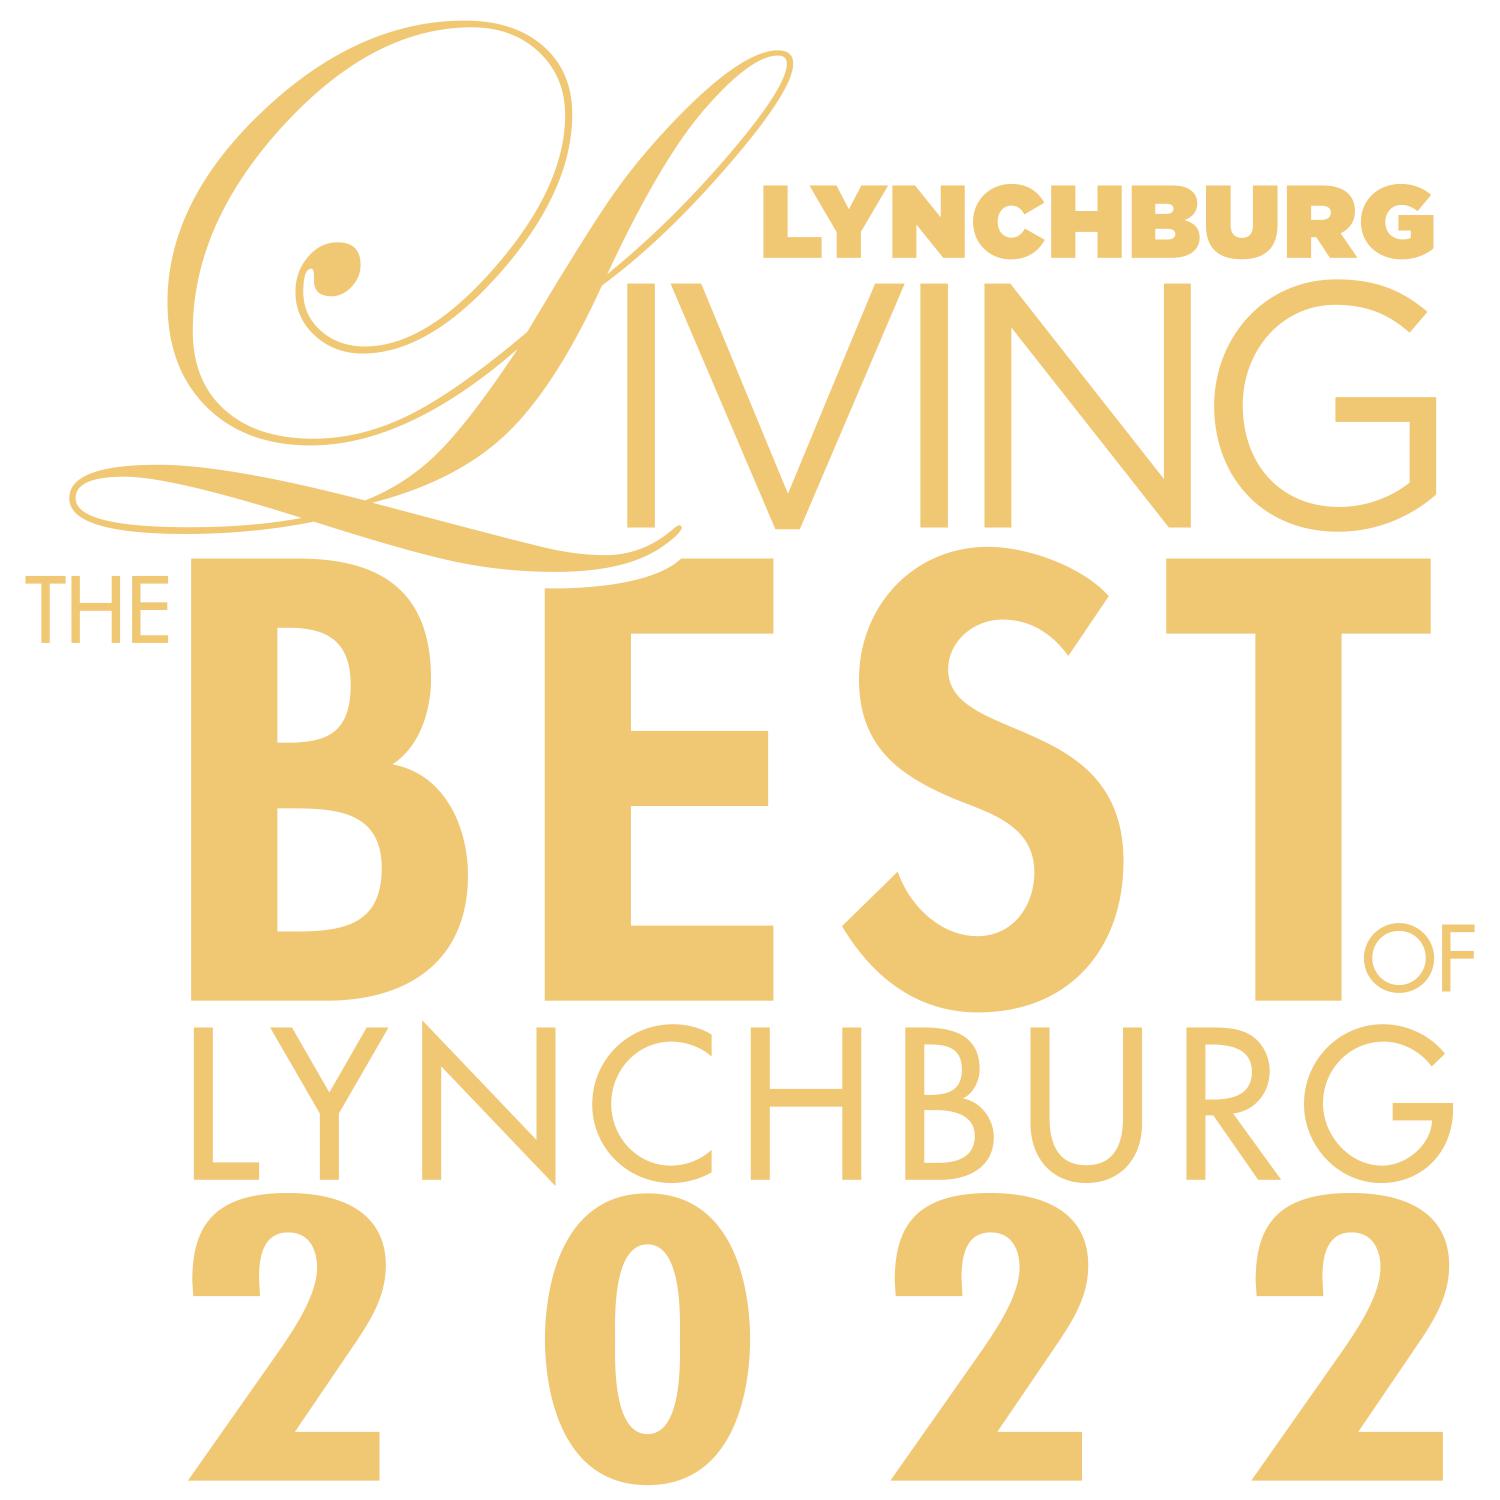 Voted Best in Living Lynchburg